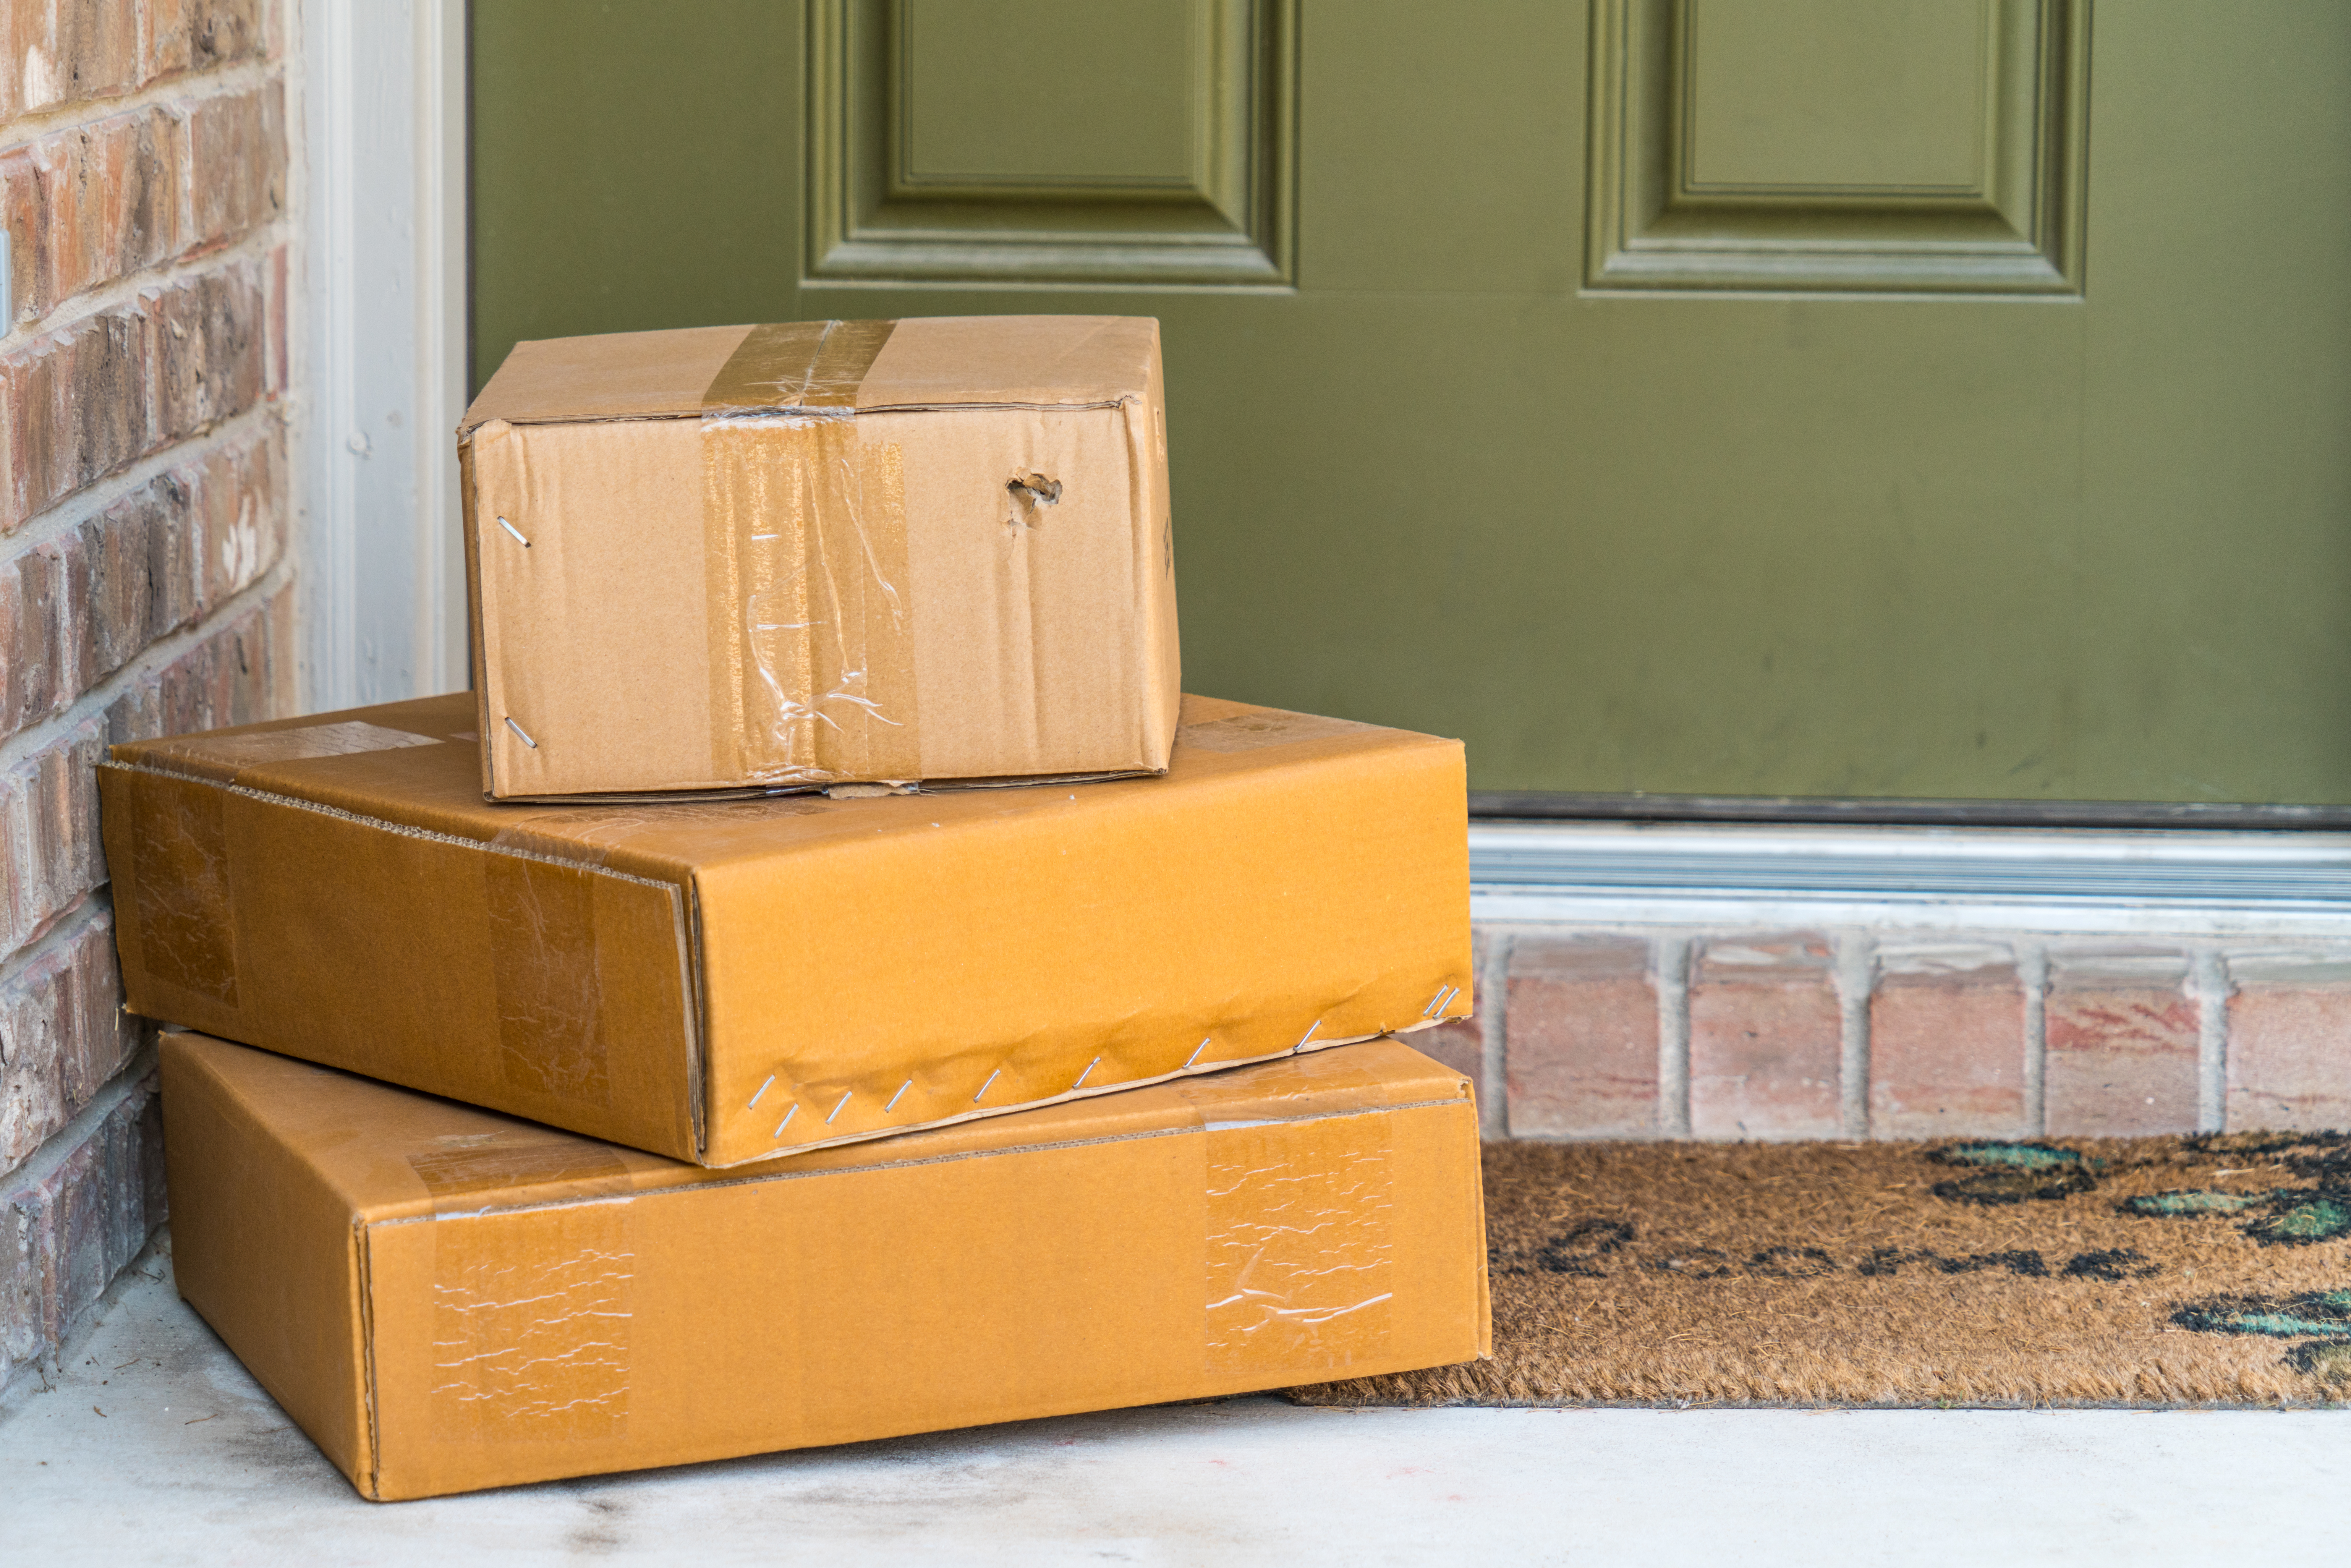 Signed, sealed, not delivered: 73% of customers lose faith as cost-of-living sees parcel theft rise